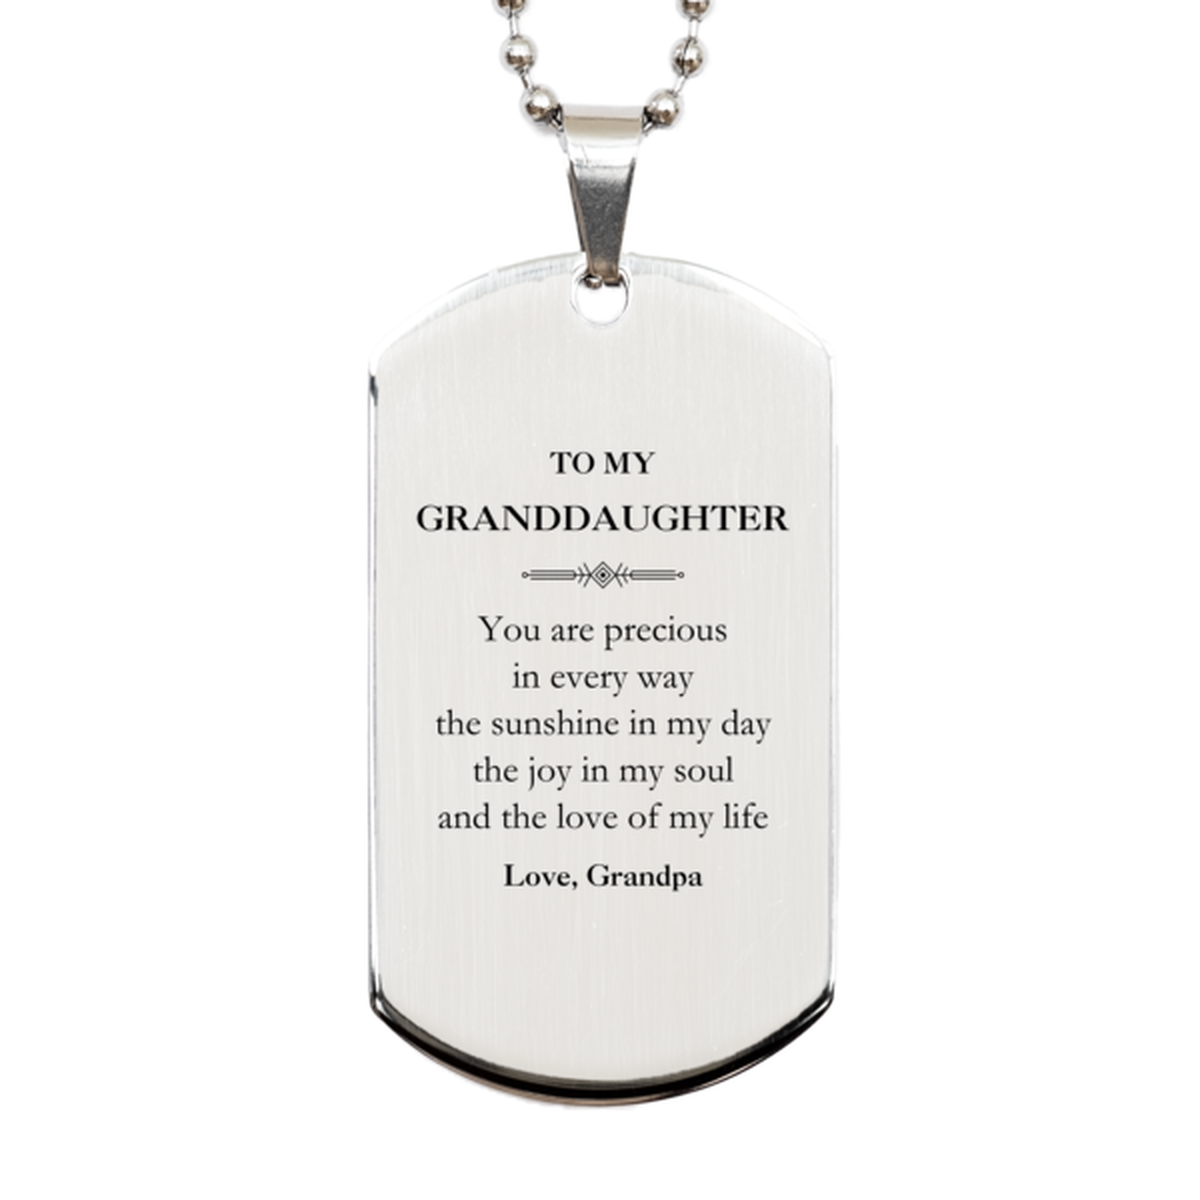 Graduation Gifts for Granddaughter Silver Dog Tag Present from Grandpa, Christmas Granddaughter Birthday Gifts Granddaughter You are precious in every way the sunshine in my day. Love, Grandpa